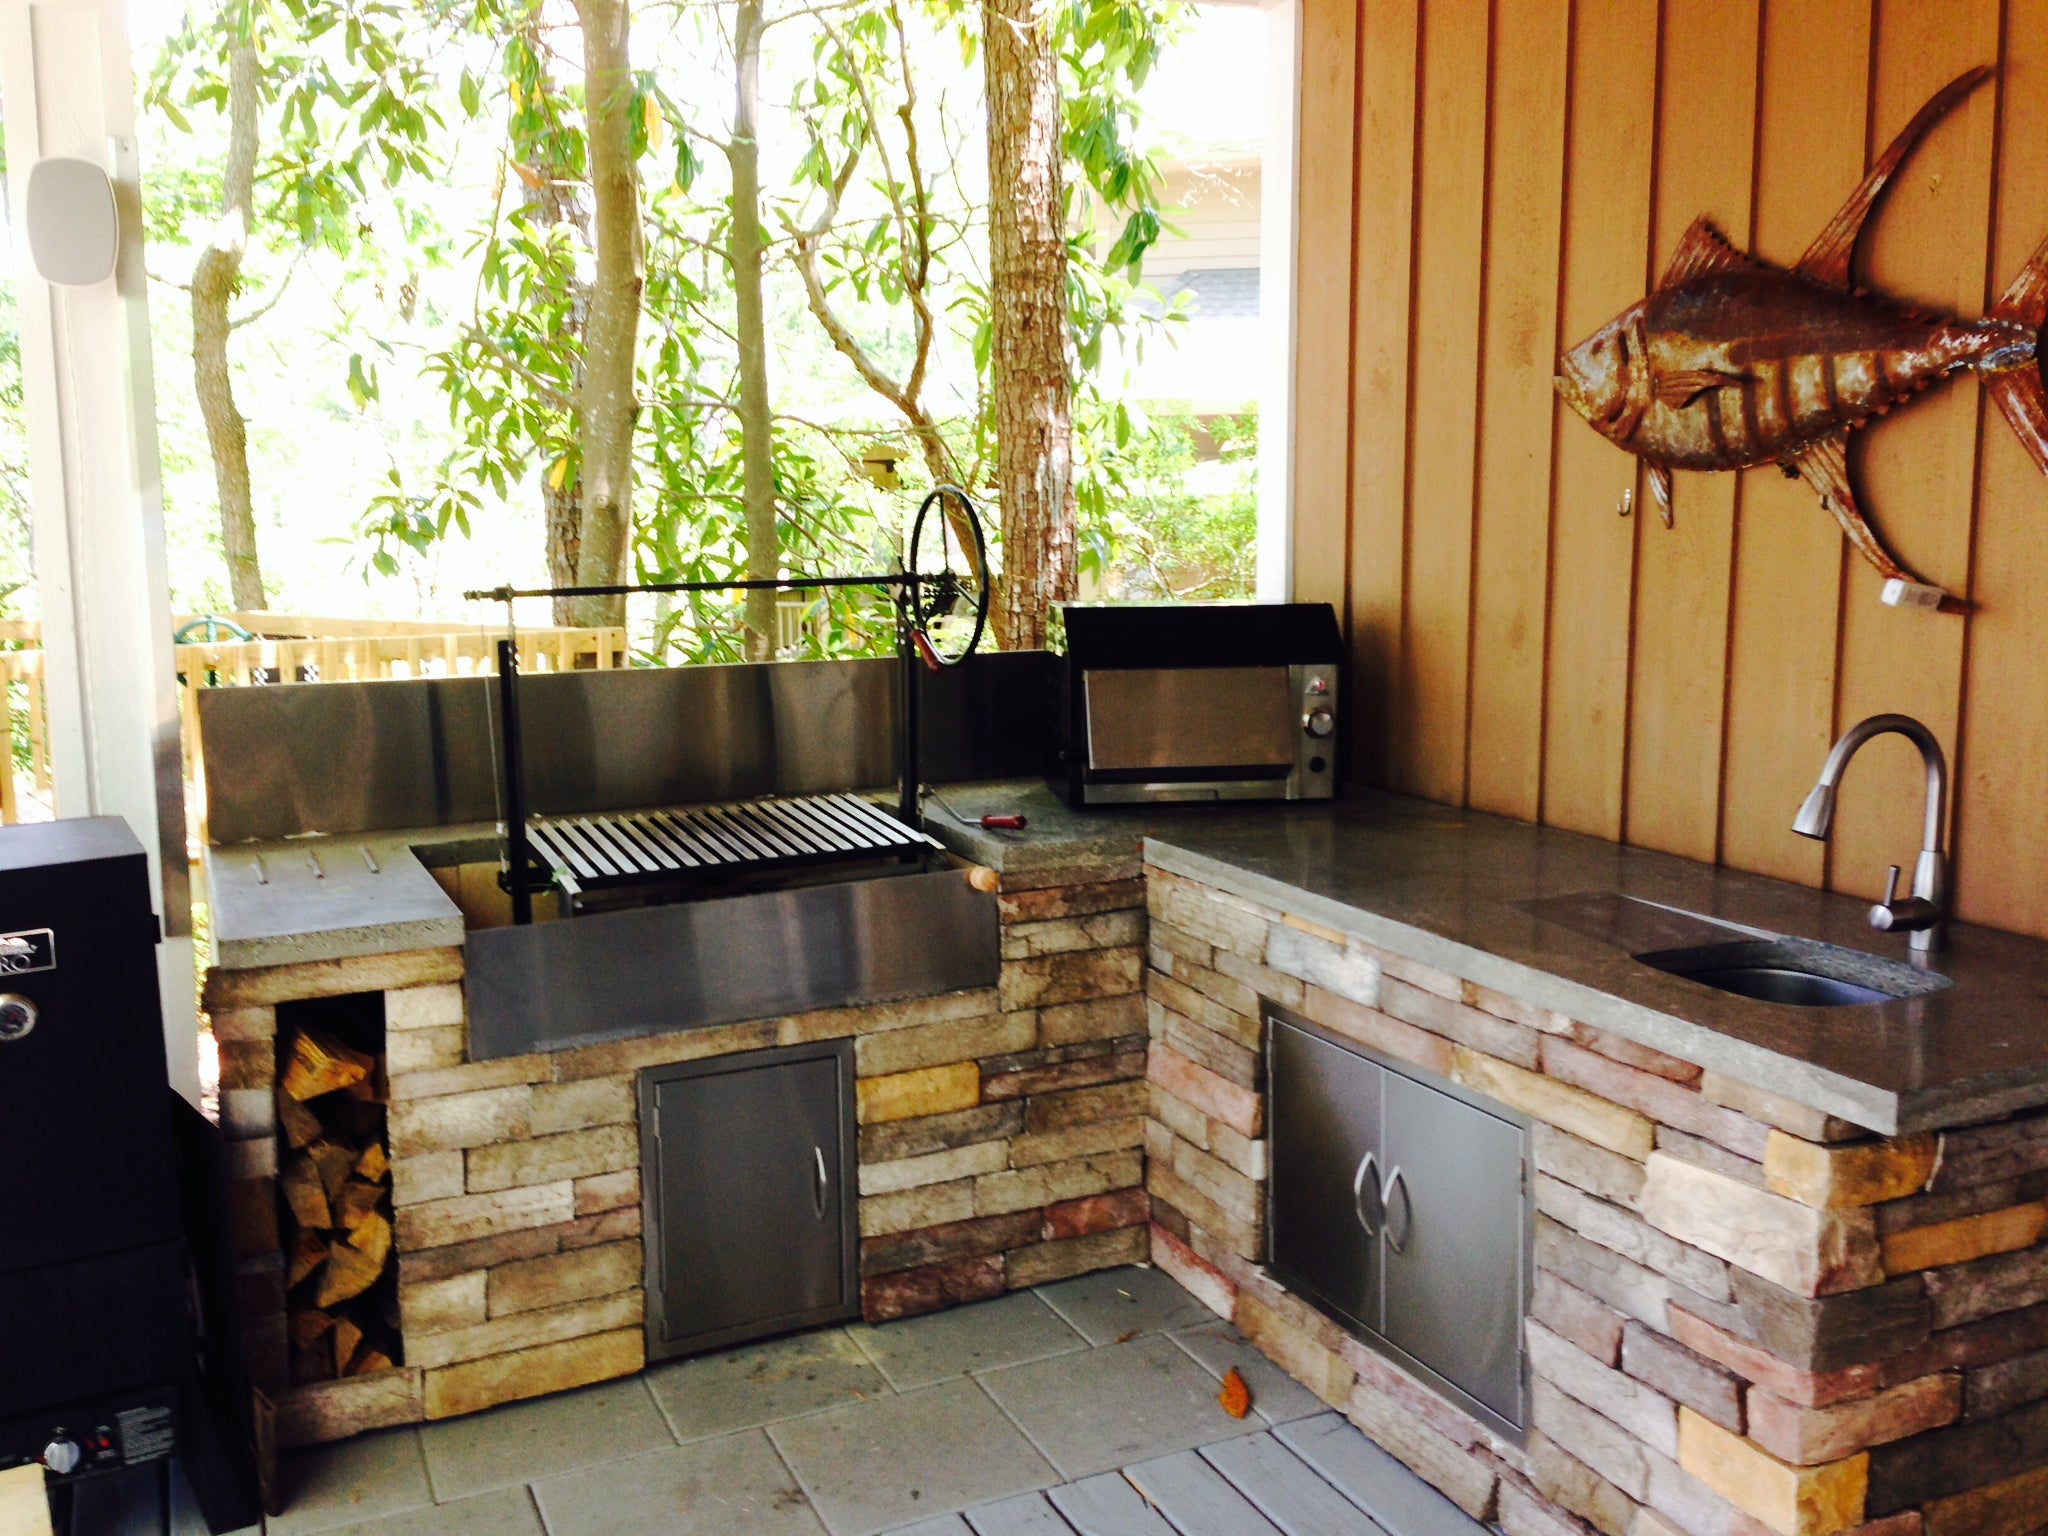 Customer installed 1000 Series Braten Campfire grill on back patio with sink and shelving